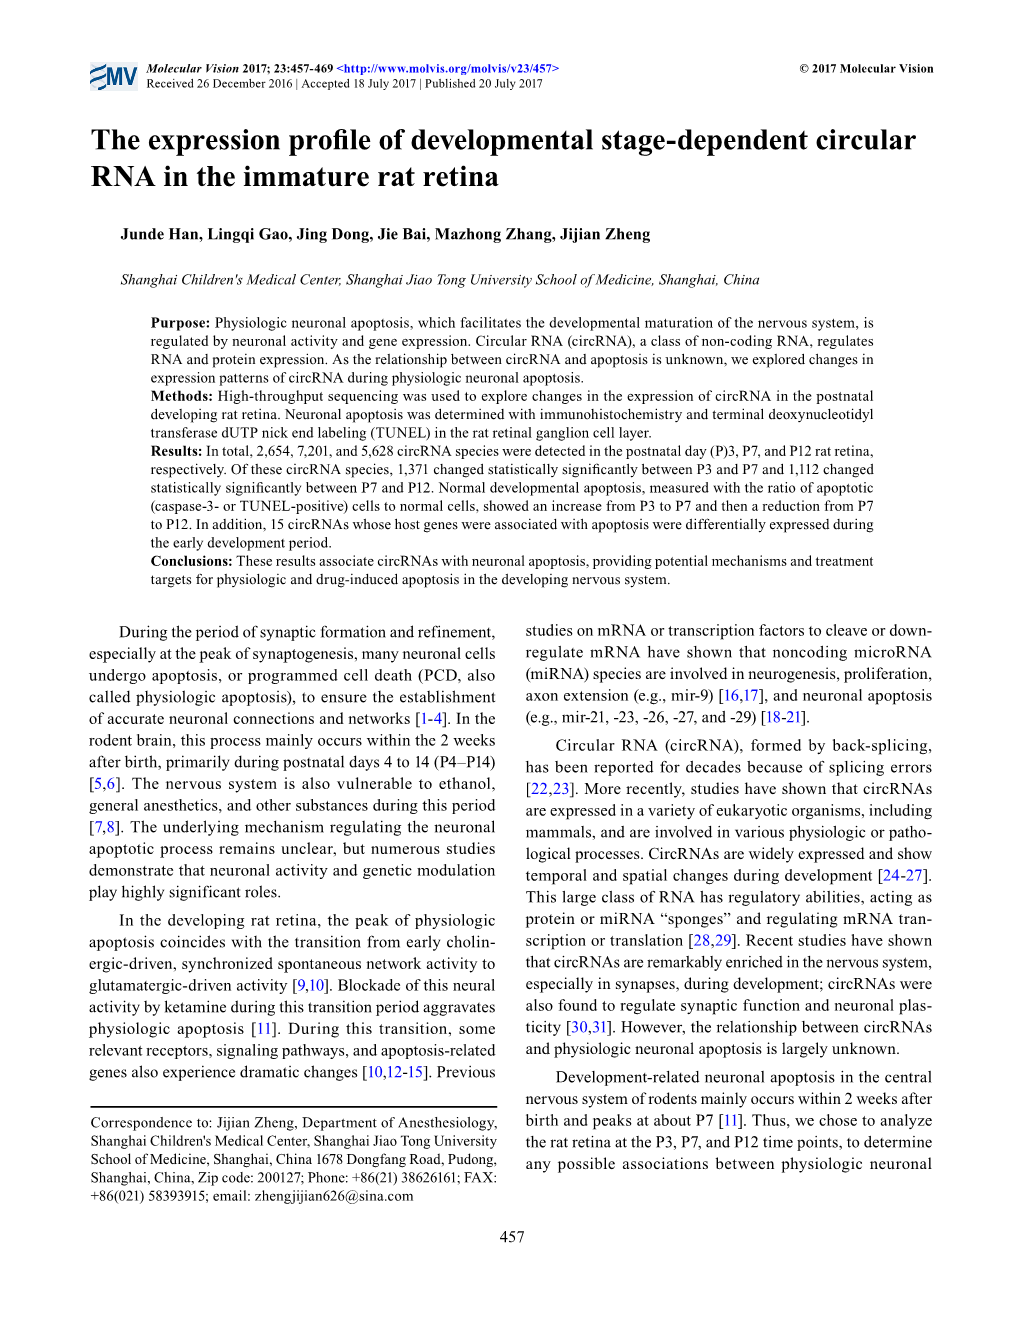 The Expression Profile of Developmental Stage-Dependent Circular RNA in the Immature Rat Retina